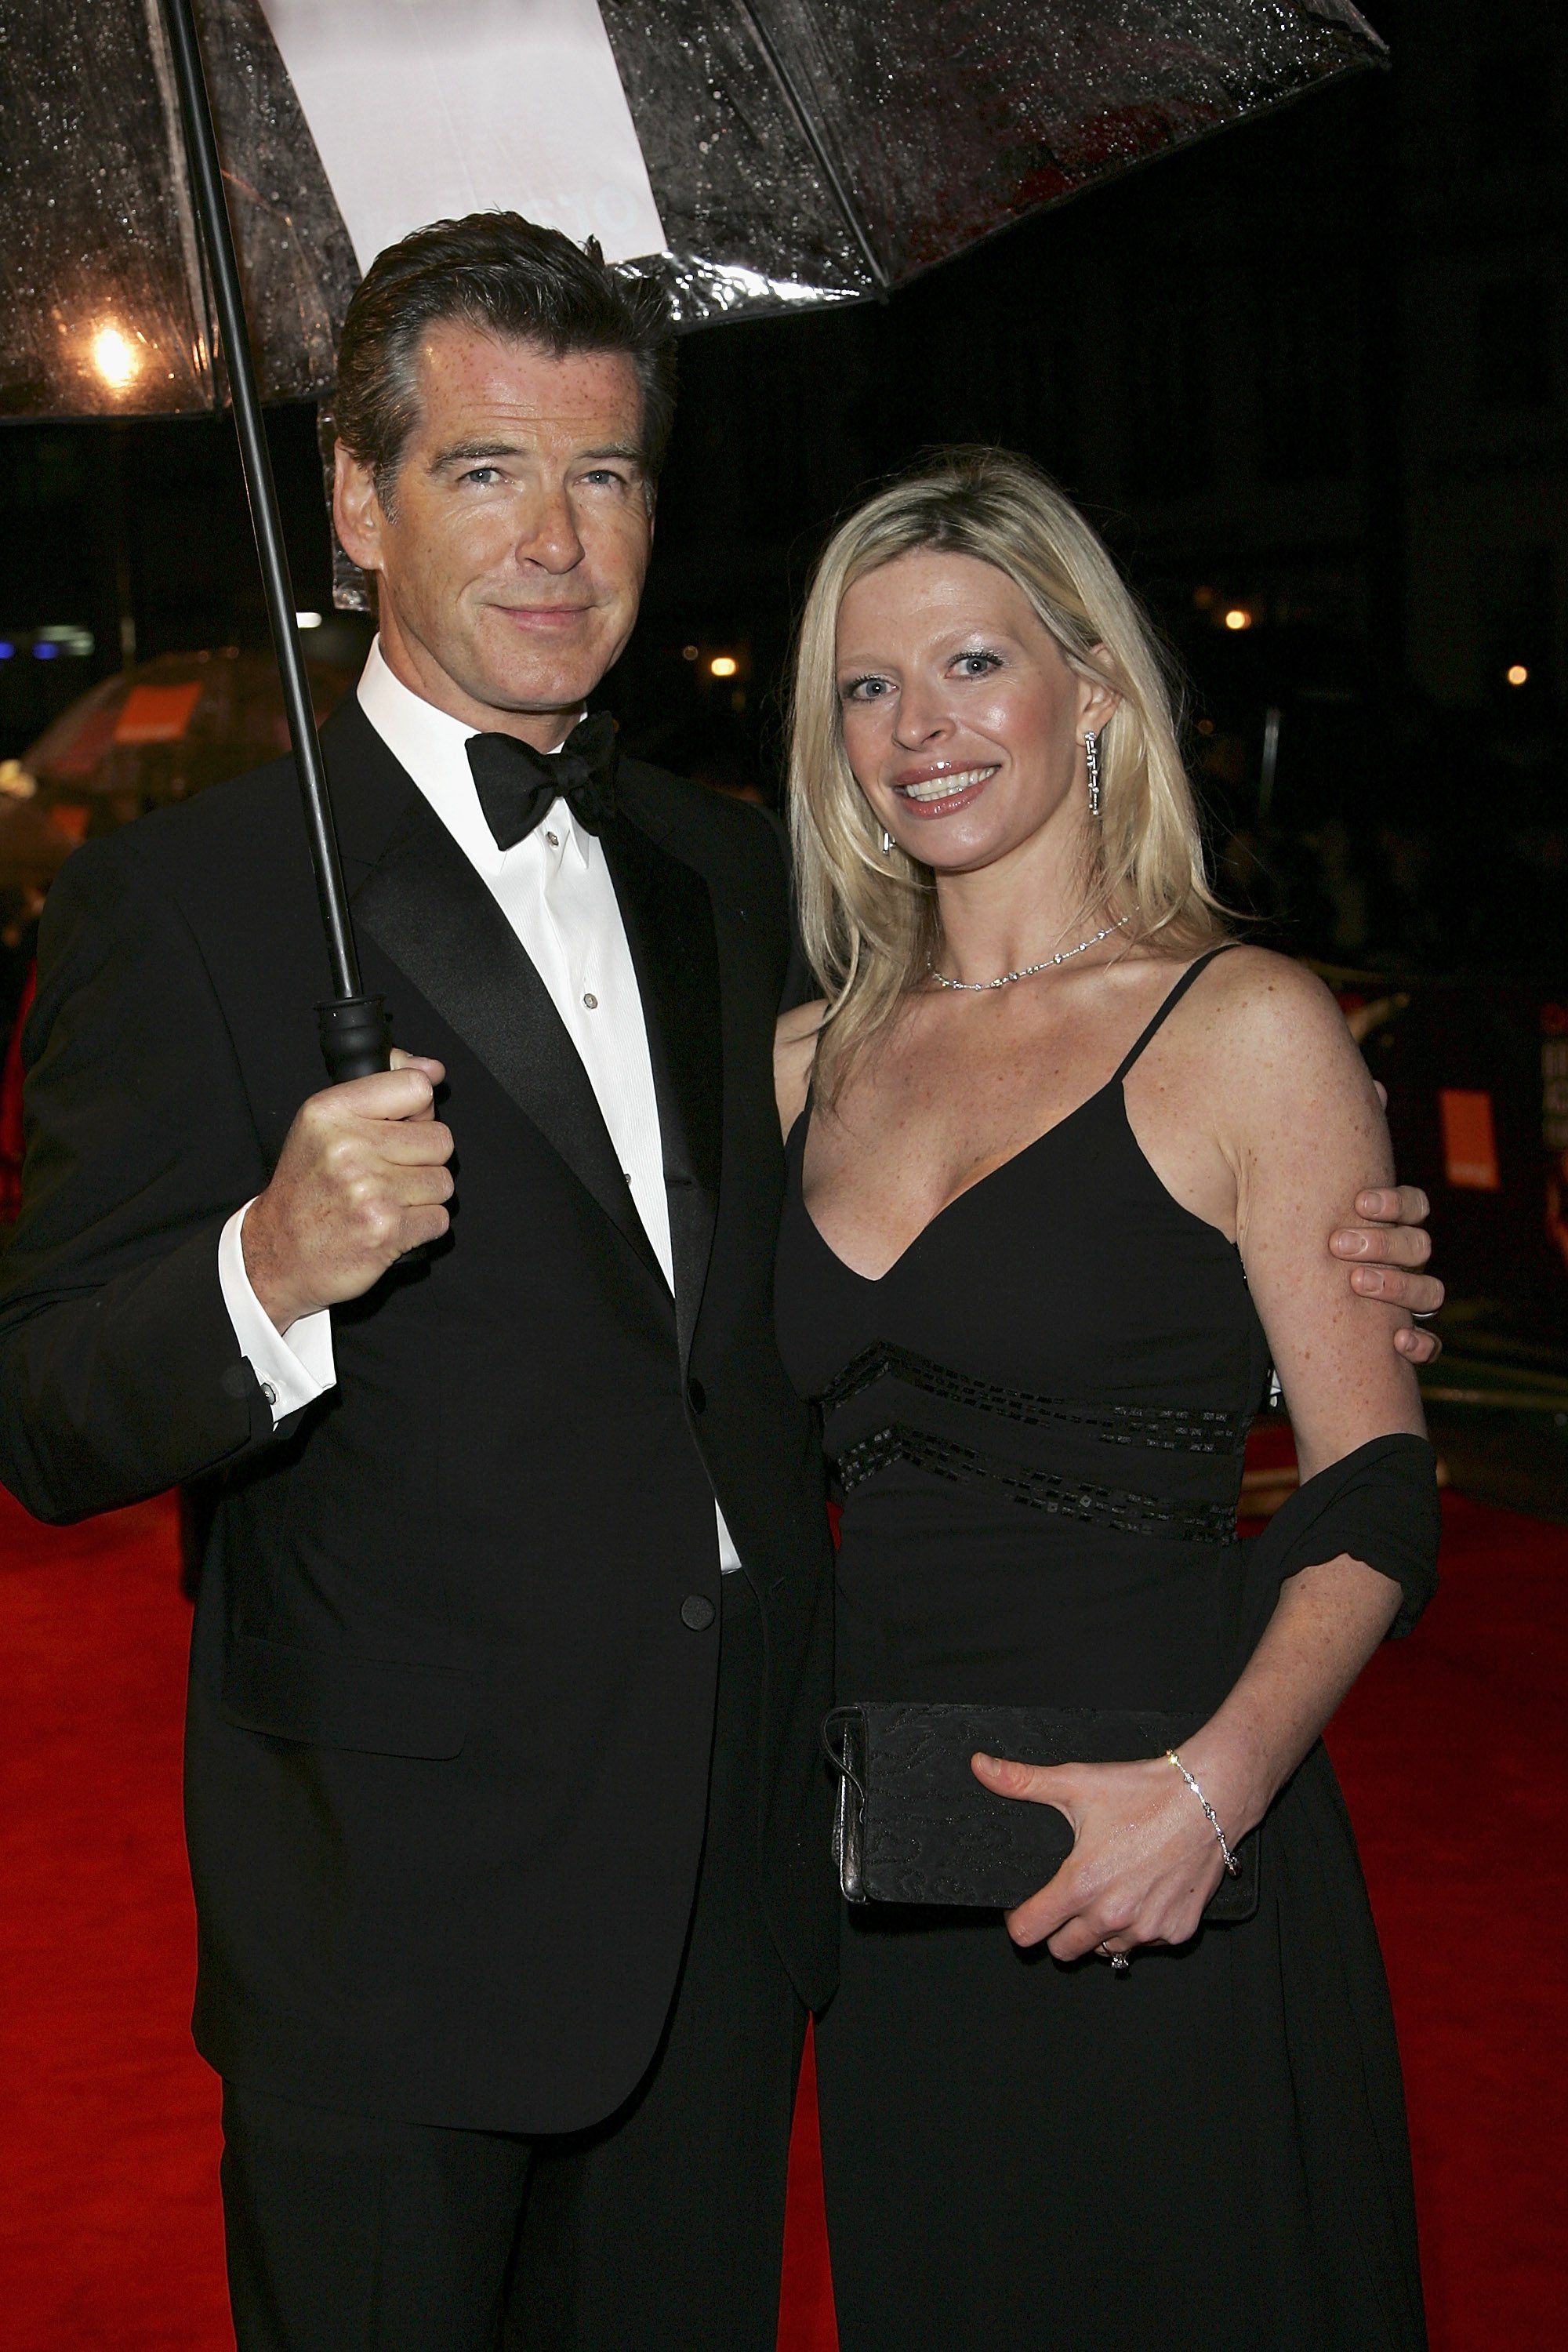 Pierce Brosnan and Charlotte at The Orange British Academy Film Awards (BAFTAs) on February 19, 2006, in London | Source: Getty Images